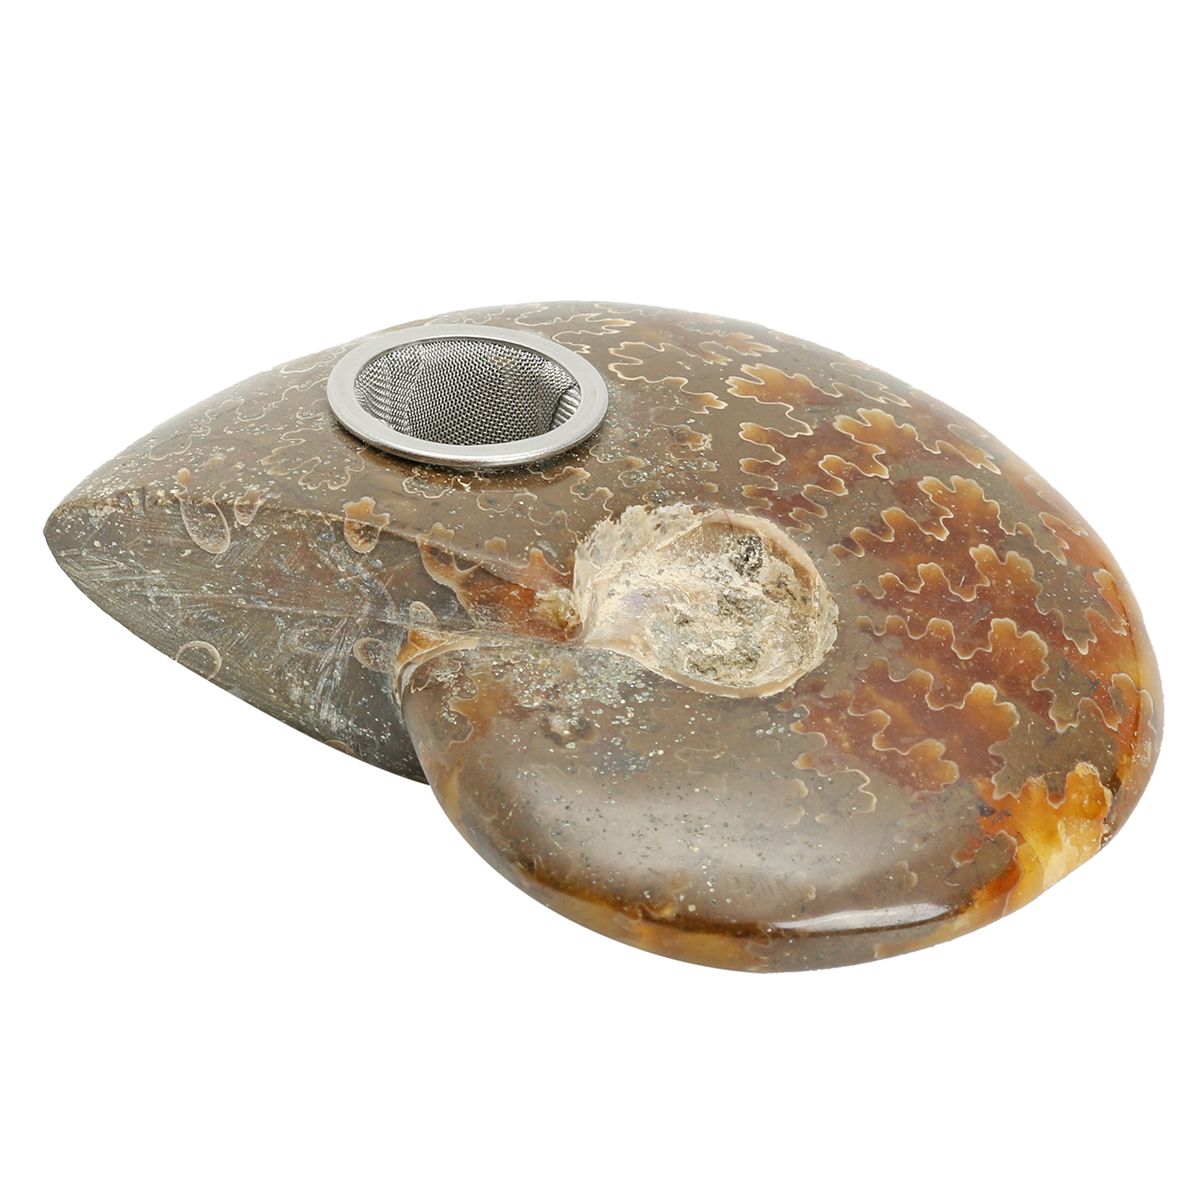 65MM-Natural-Ammonite-Fossil-Quartz-Crystal-Stone-Pipe-Healing-With-Carb-Gifts-Decorations-1564271